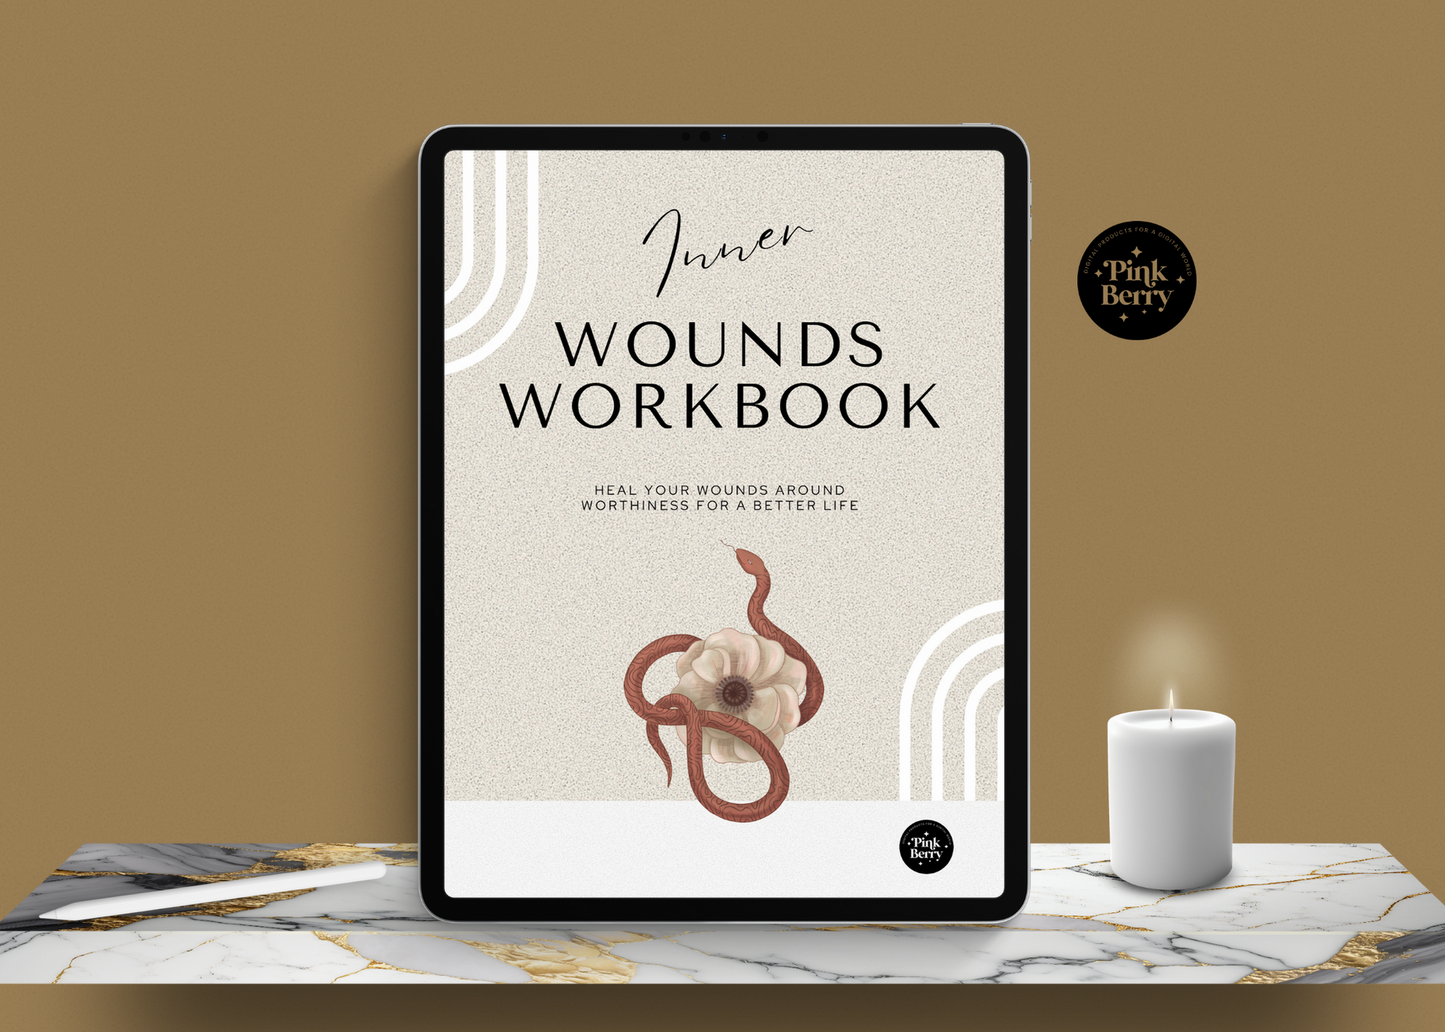 Inner Wounds Digital Journal/Workbook-52 Page Goodnotes Digital Workbook- 6 Steps With Writing Prompts